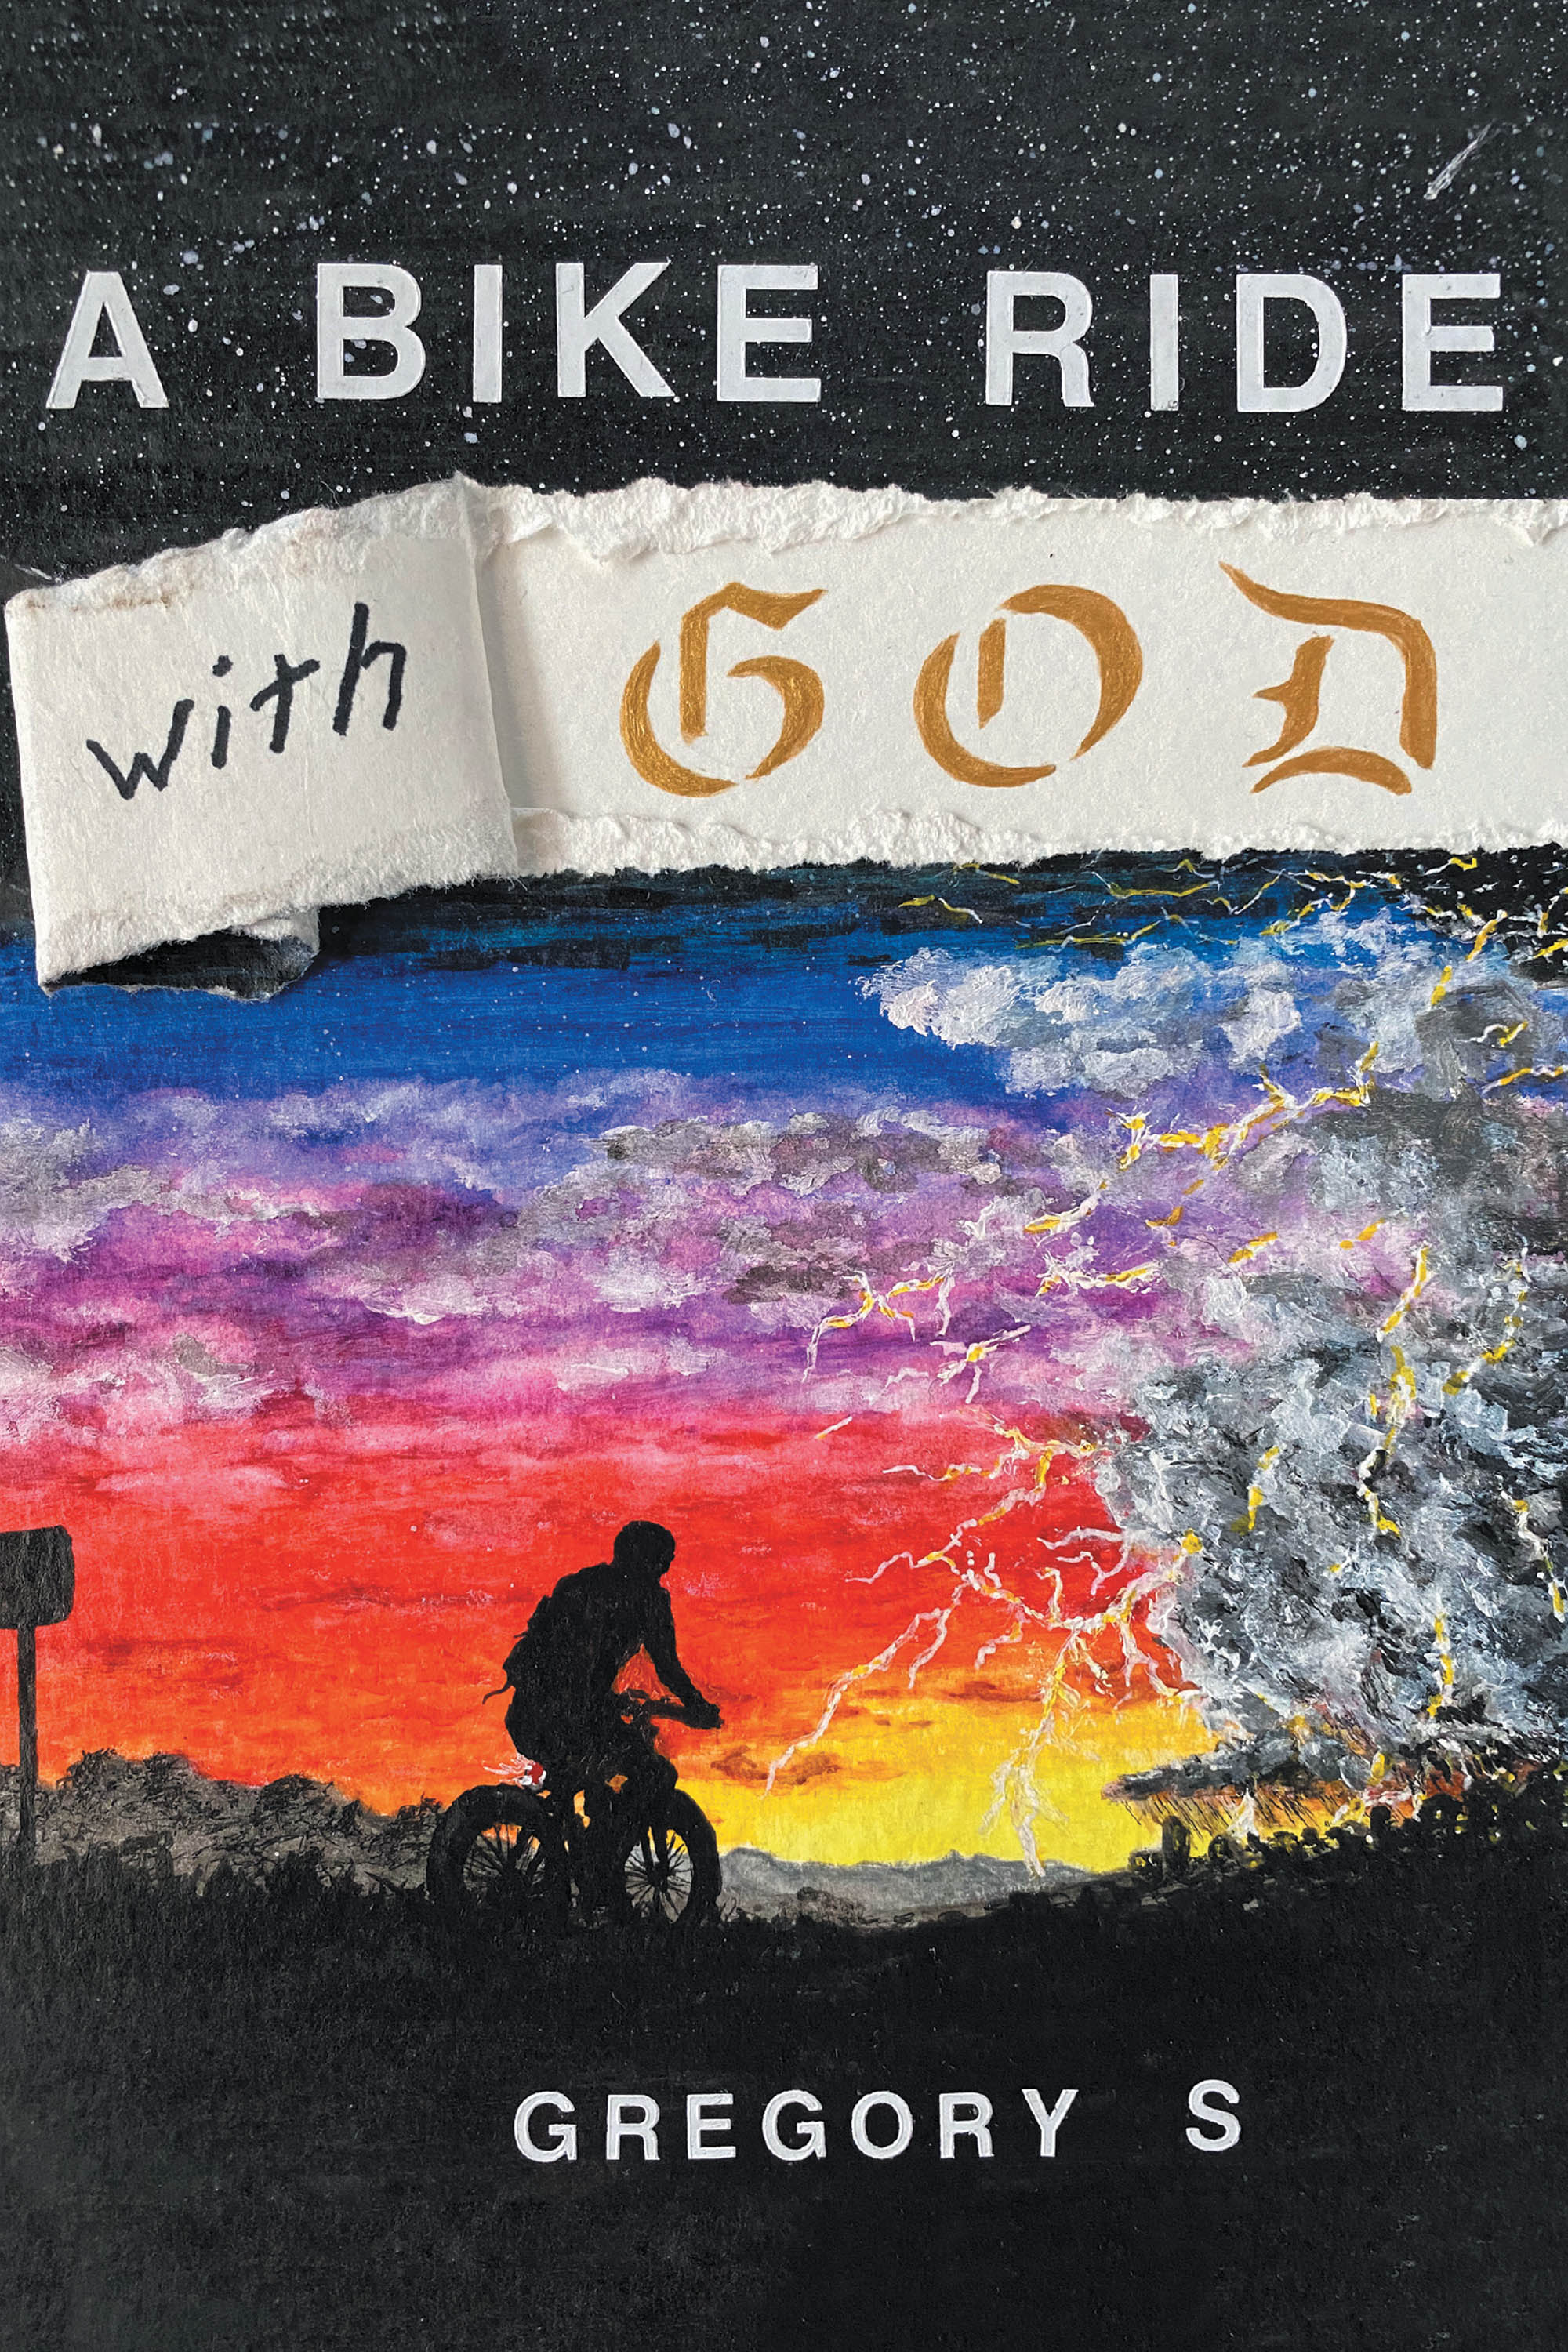 Author Gregory S’s New Book, "A Bike Ride with God," is a Deeply Personal Memoir of His Formative Years and the Daunting Challenges of His Addiction and Recovery